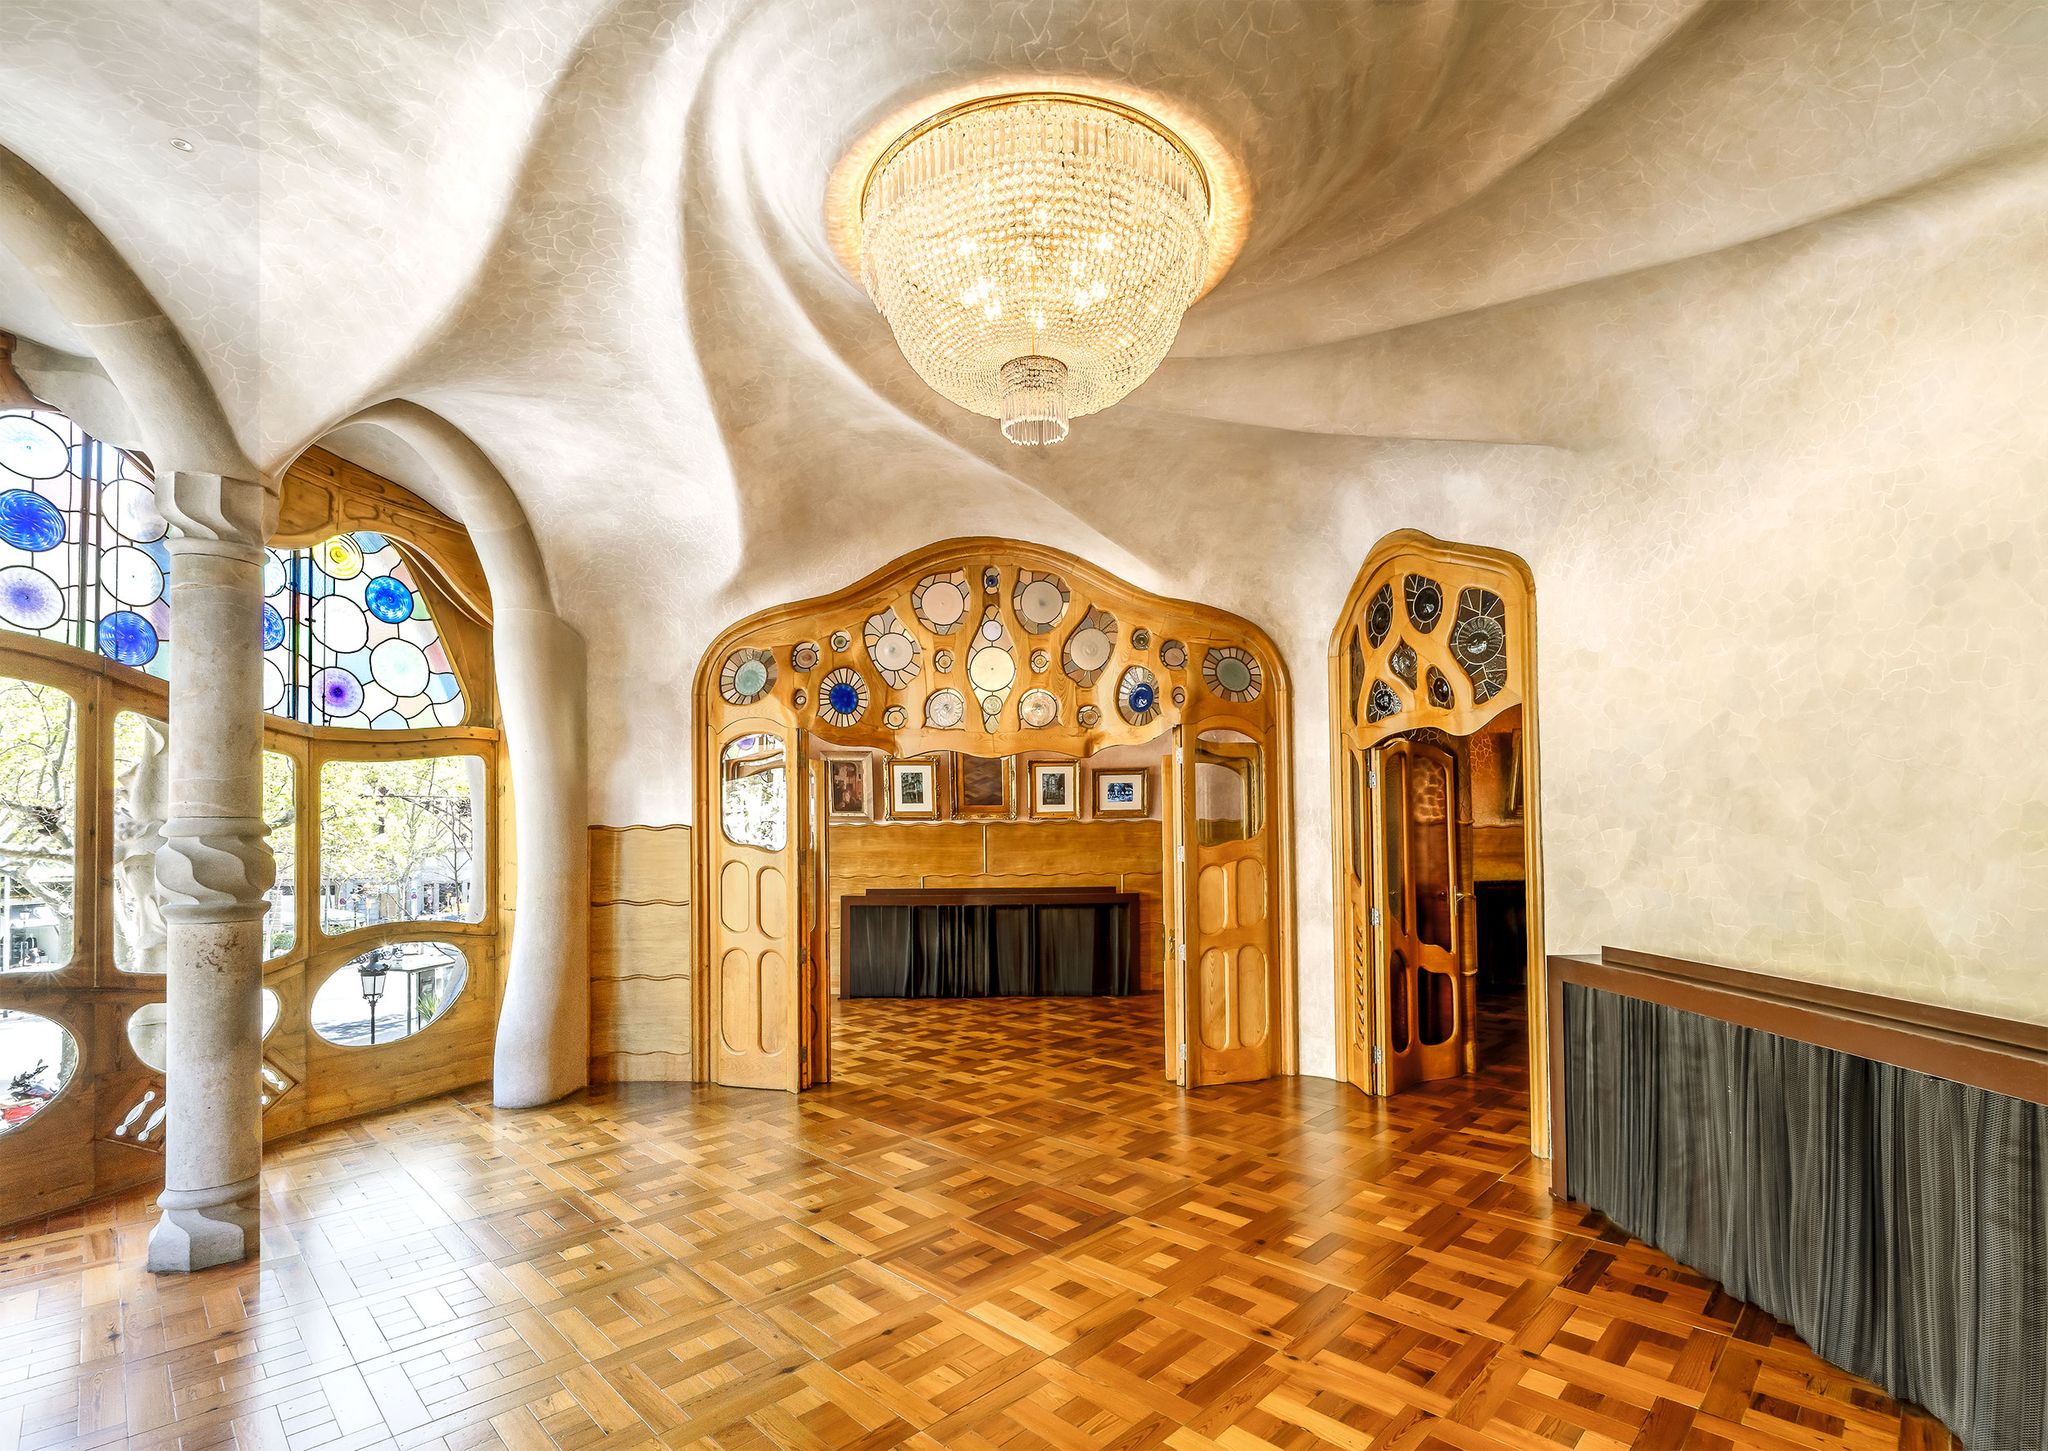 interior of casa batlló in barcelona a gaudi house with undulating frames on the doors and stained glass windows